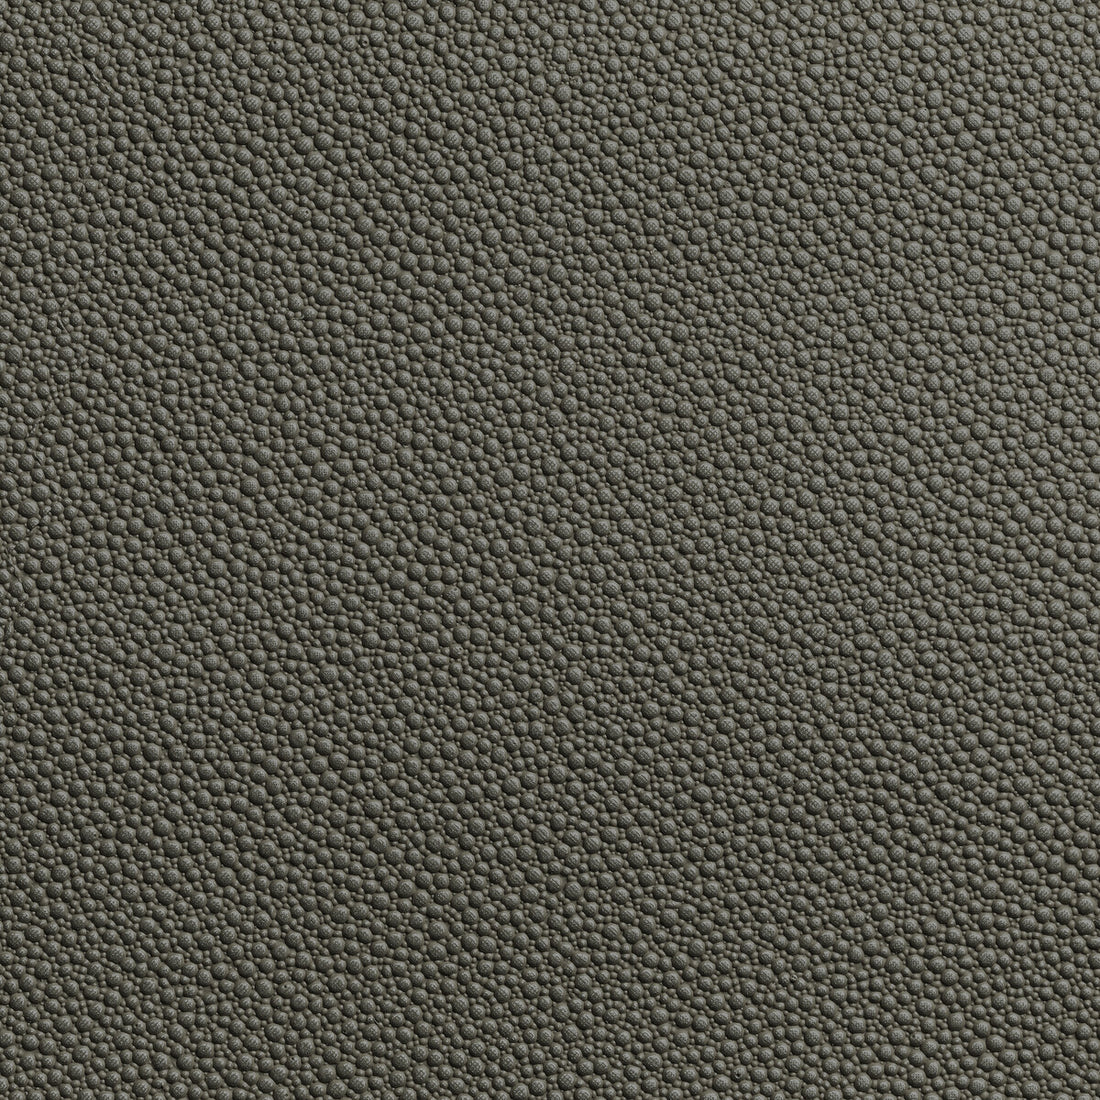 Fetch fabric in granite color - pattern FETCH.21.0 - by Kravet Contract in the Foundations / Value collection